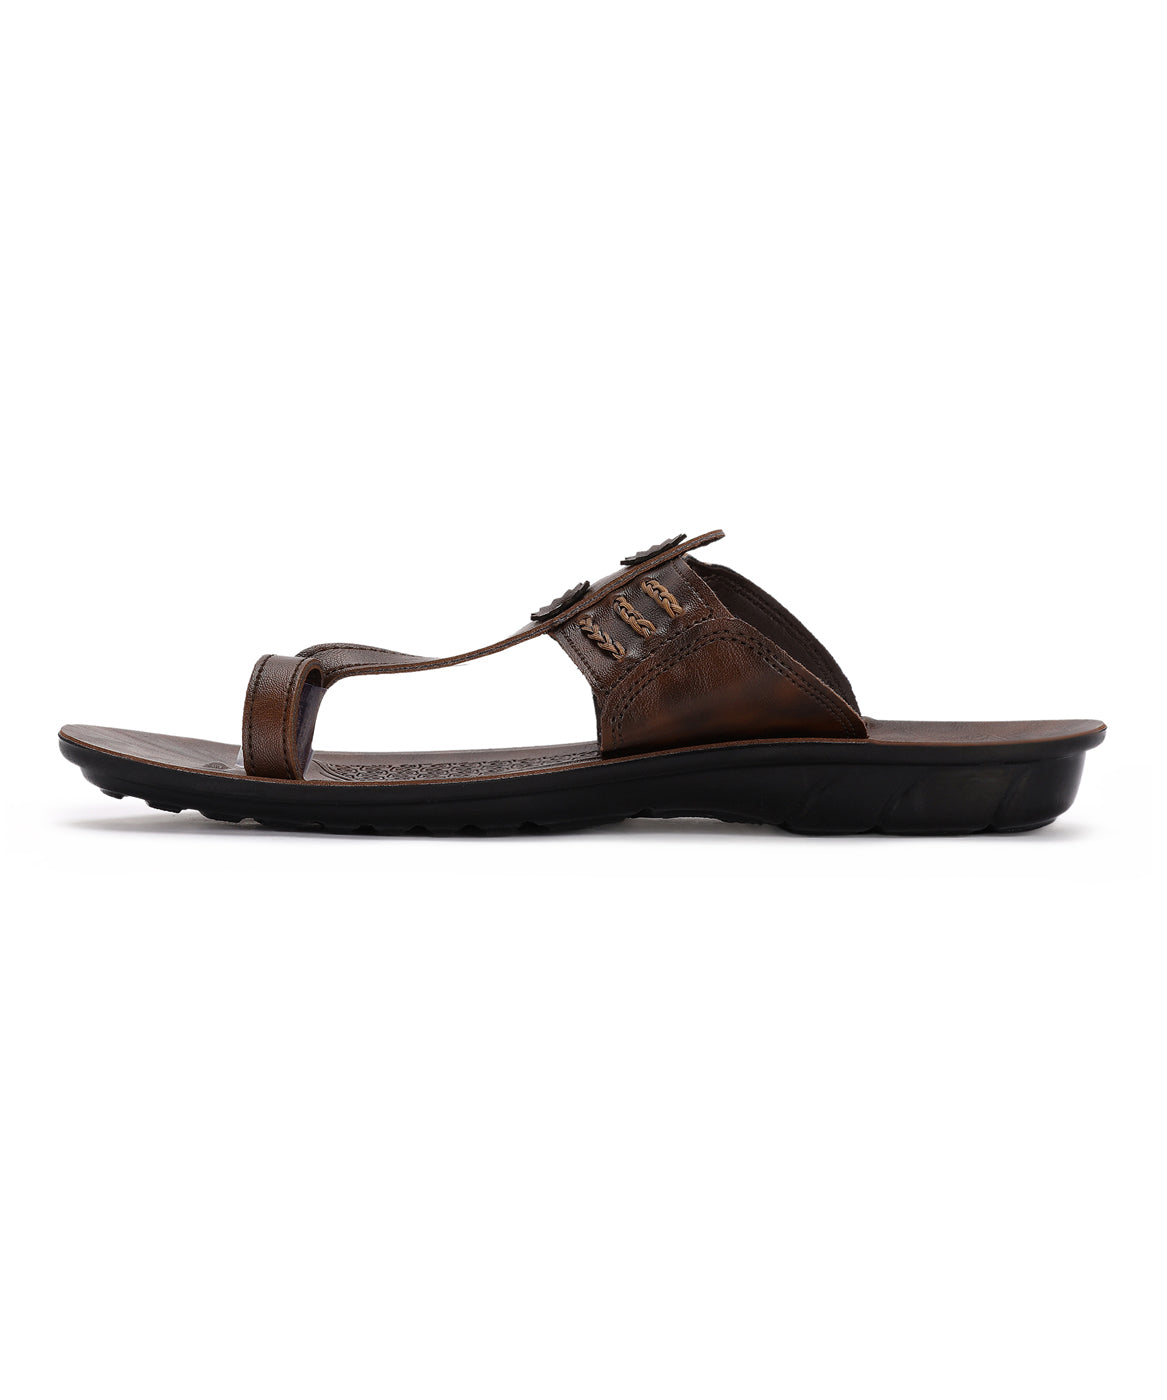 Paragon PUK2230G Men Stylish Sandals | Comfortable Sandals for Daily Outdoor Use | Casual Formal Sandals with Cushioned Soles